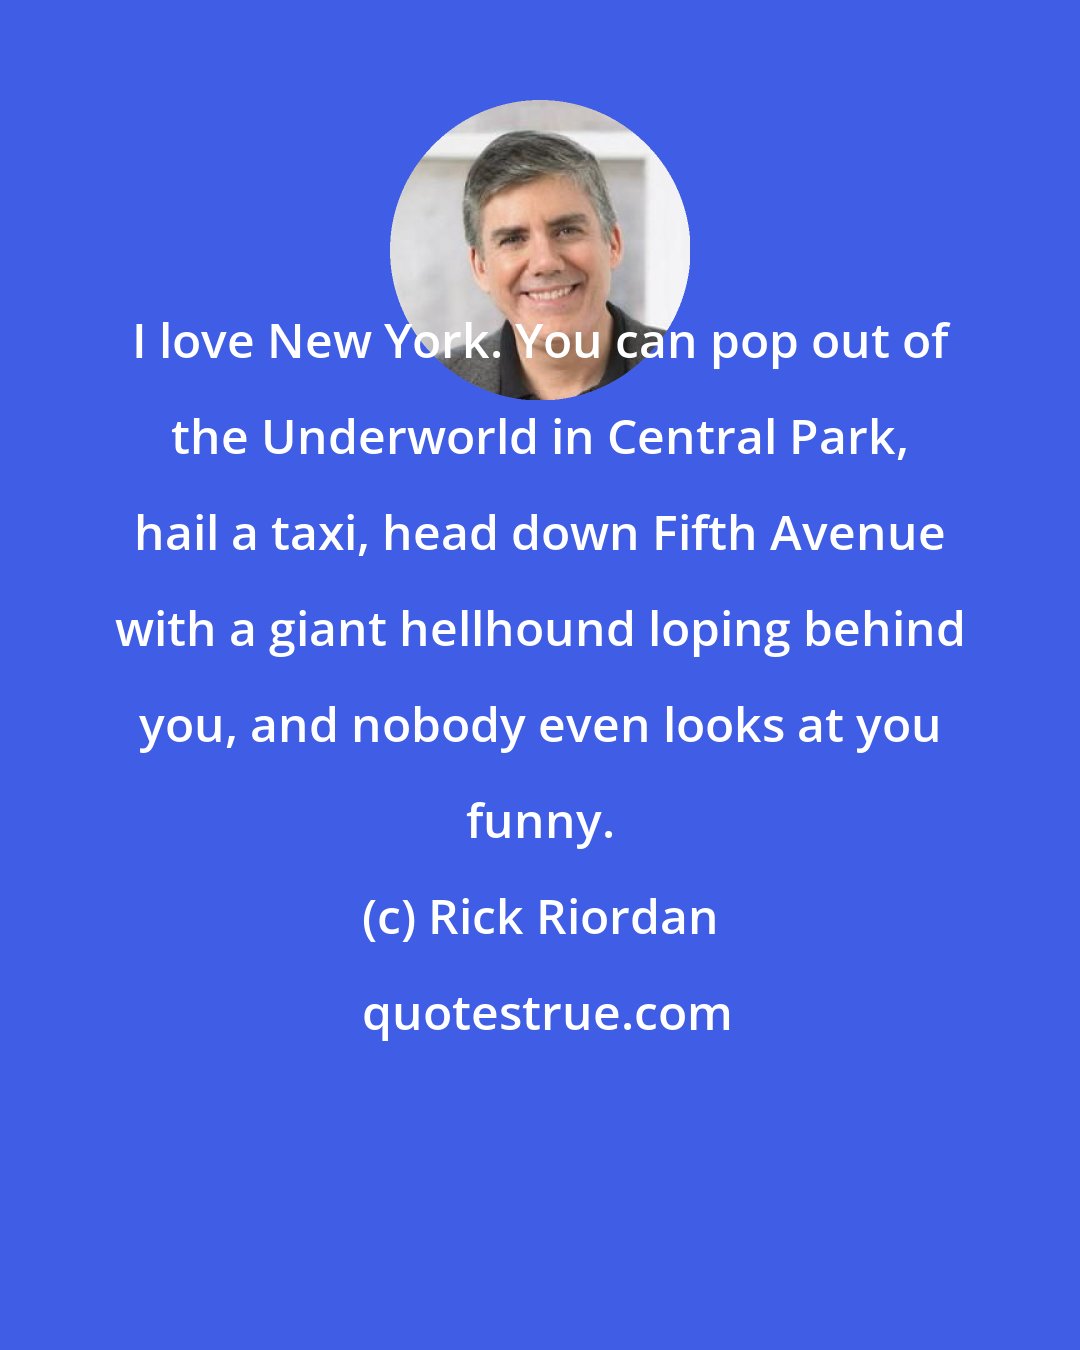 Rick Riordan: I love New York. You can pop out of the Underworld in Central Park, hail a taxi, head down Fifth Avenue with a giant hellhound loping behind you, and nobody even looks at you funny.